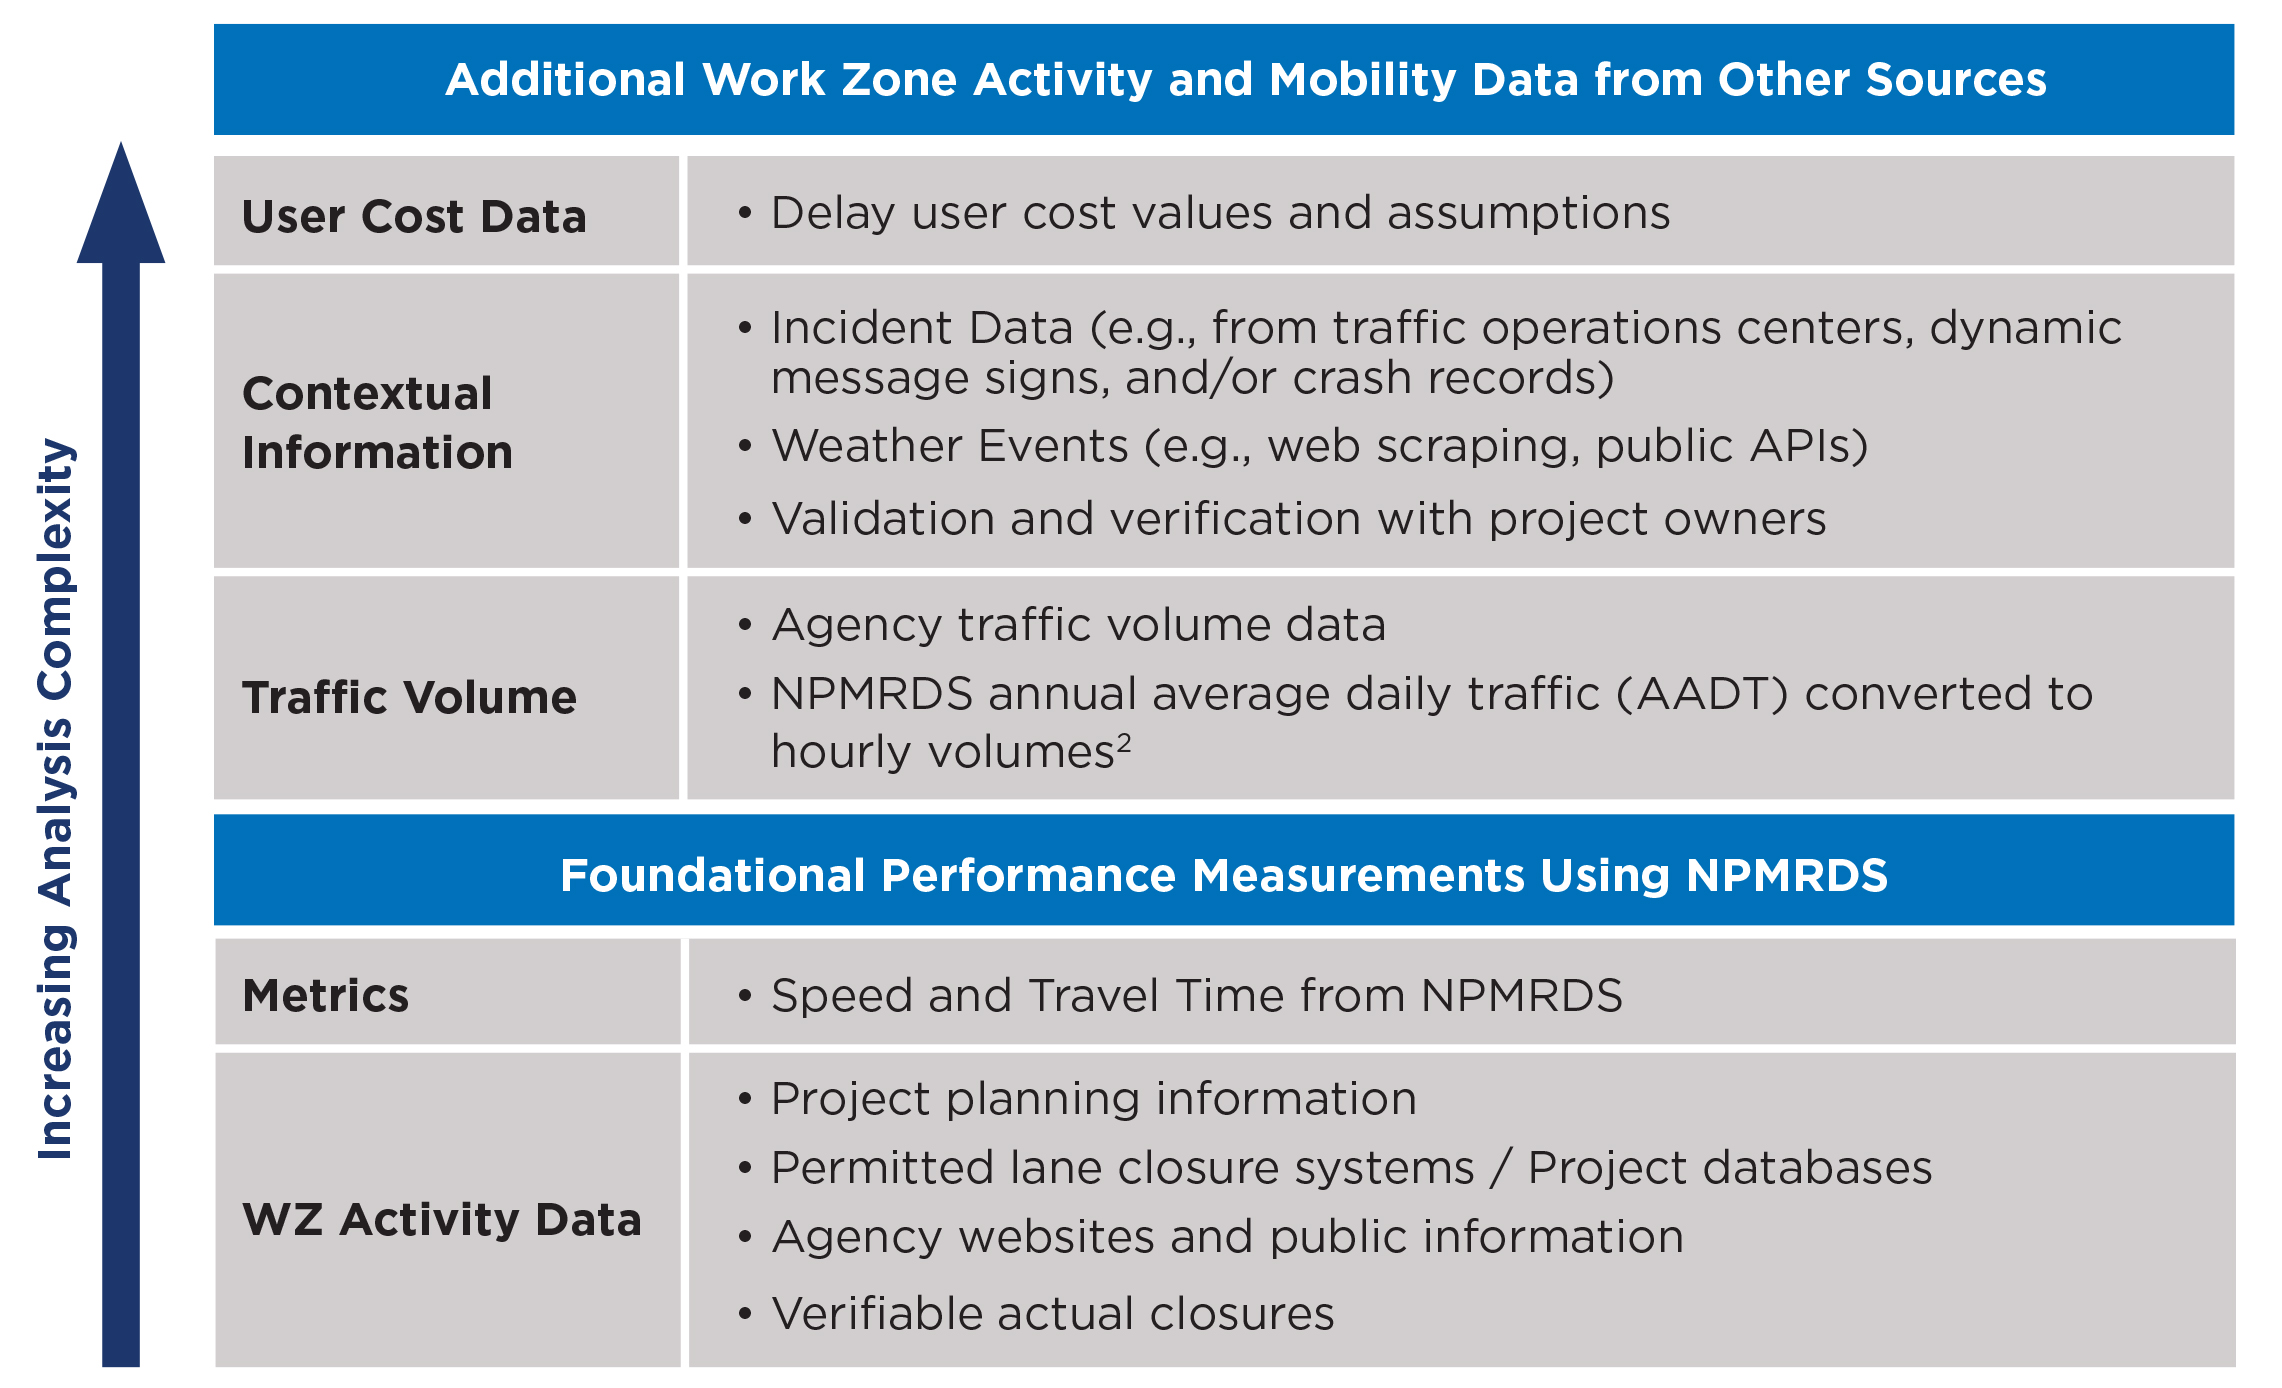 Table of the data building blocks (work zone activity data, metrics, traffic volume, contextual information, user cost data) and the types of analyses that they contribute to using the NPMRDS, shown in incraseing analysis complexity.